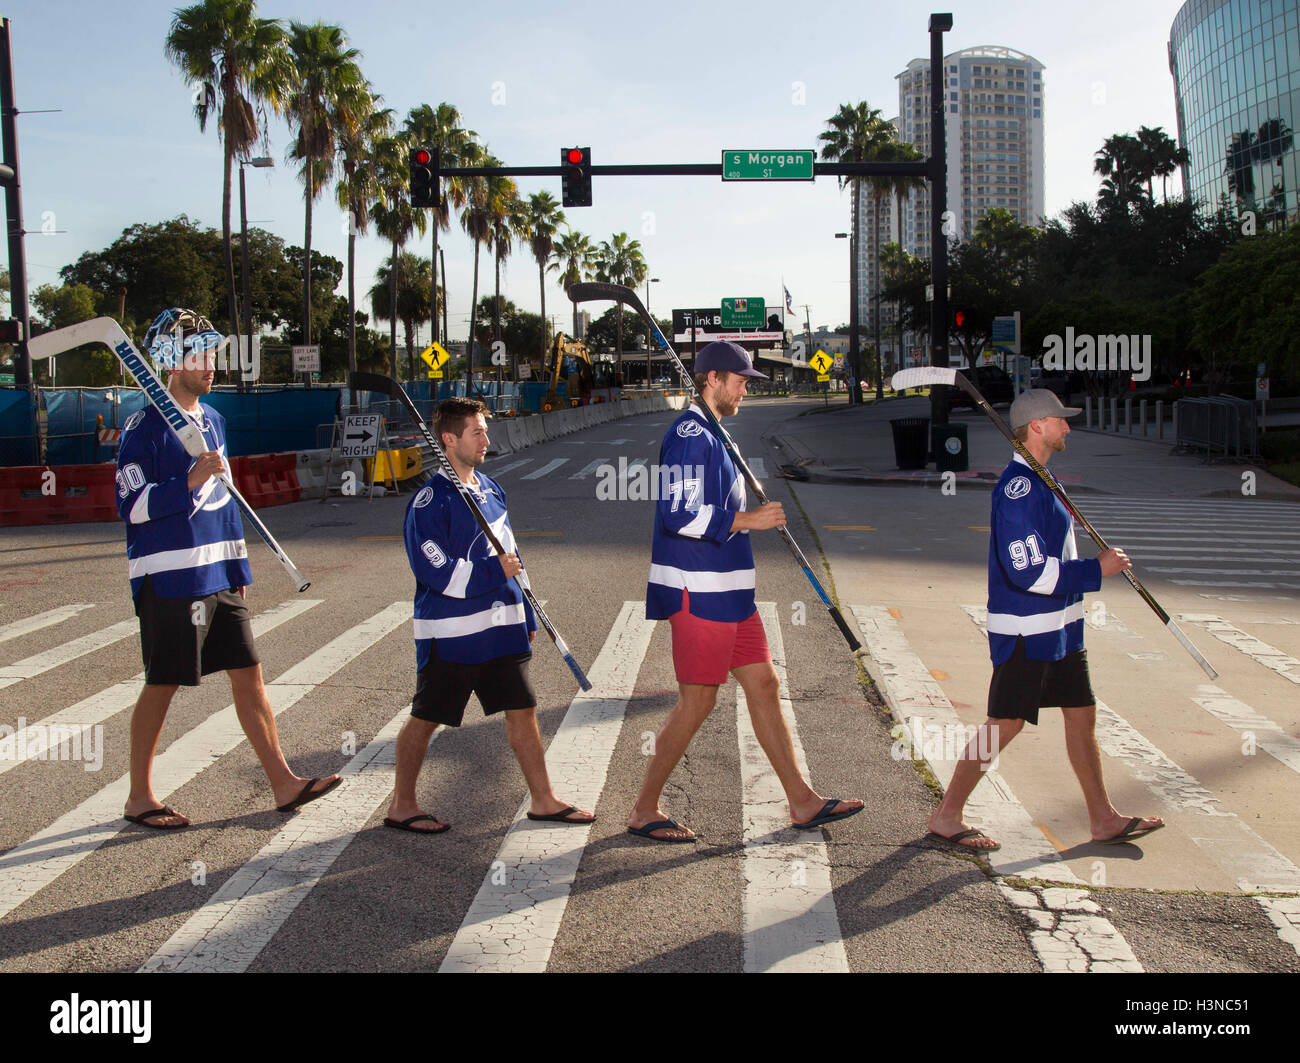 Tampa, Florida, USA. 8th Oct, 2016. DIRK SHADD | Times.Special section cover for the opening of the 2016-2017 Tampa Bay Lightning season. The Band is Back Together! Break out the vinyl with this Abbey Road Beatles album cover recreation. From left is Tampa Bay Lightning goalie Ben Bishop (30), center Tyler Johnson (9), defenseman Victor Hedman (77) and center Steven Stamkos (91). Instead of crossing Abbey Road in London, this fab four is crossing Channelside Drive with the Amalie Arena up ahead on right. © Dirk Shadd/Tampa Bay Times/ZUMA Wire/Alamy Live News Stock Photo